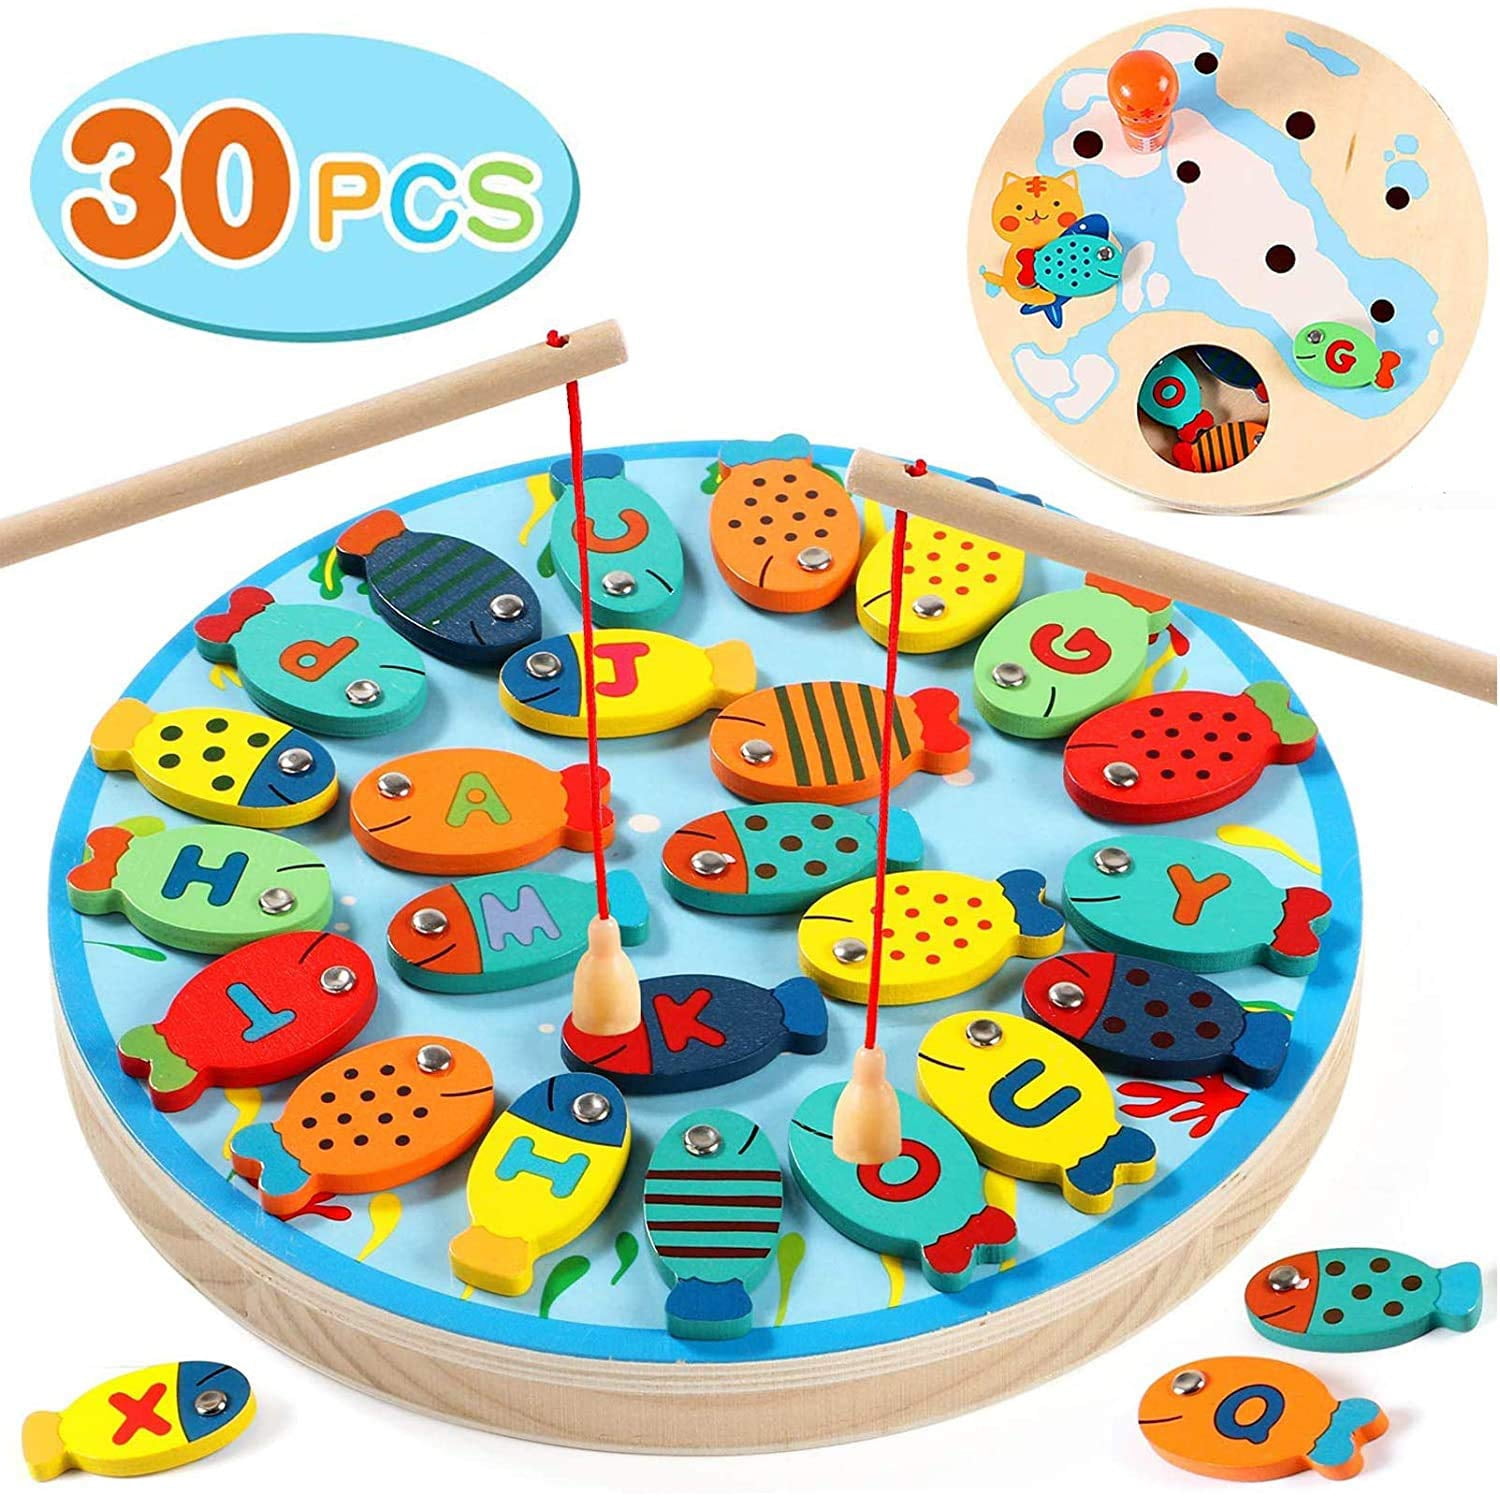  Magnetic Fishing Game for Kids, Fishing Rod and Kids Fishing  Game  Song Tales and Animal Sounds, Birthday Gift, Preschool Learning  Fishing Toy with Outdoor Fishing Bath Toys for Toddlers 345 